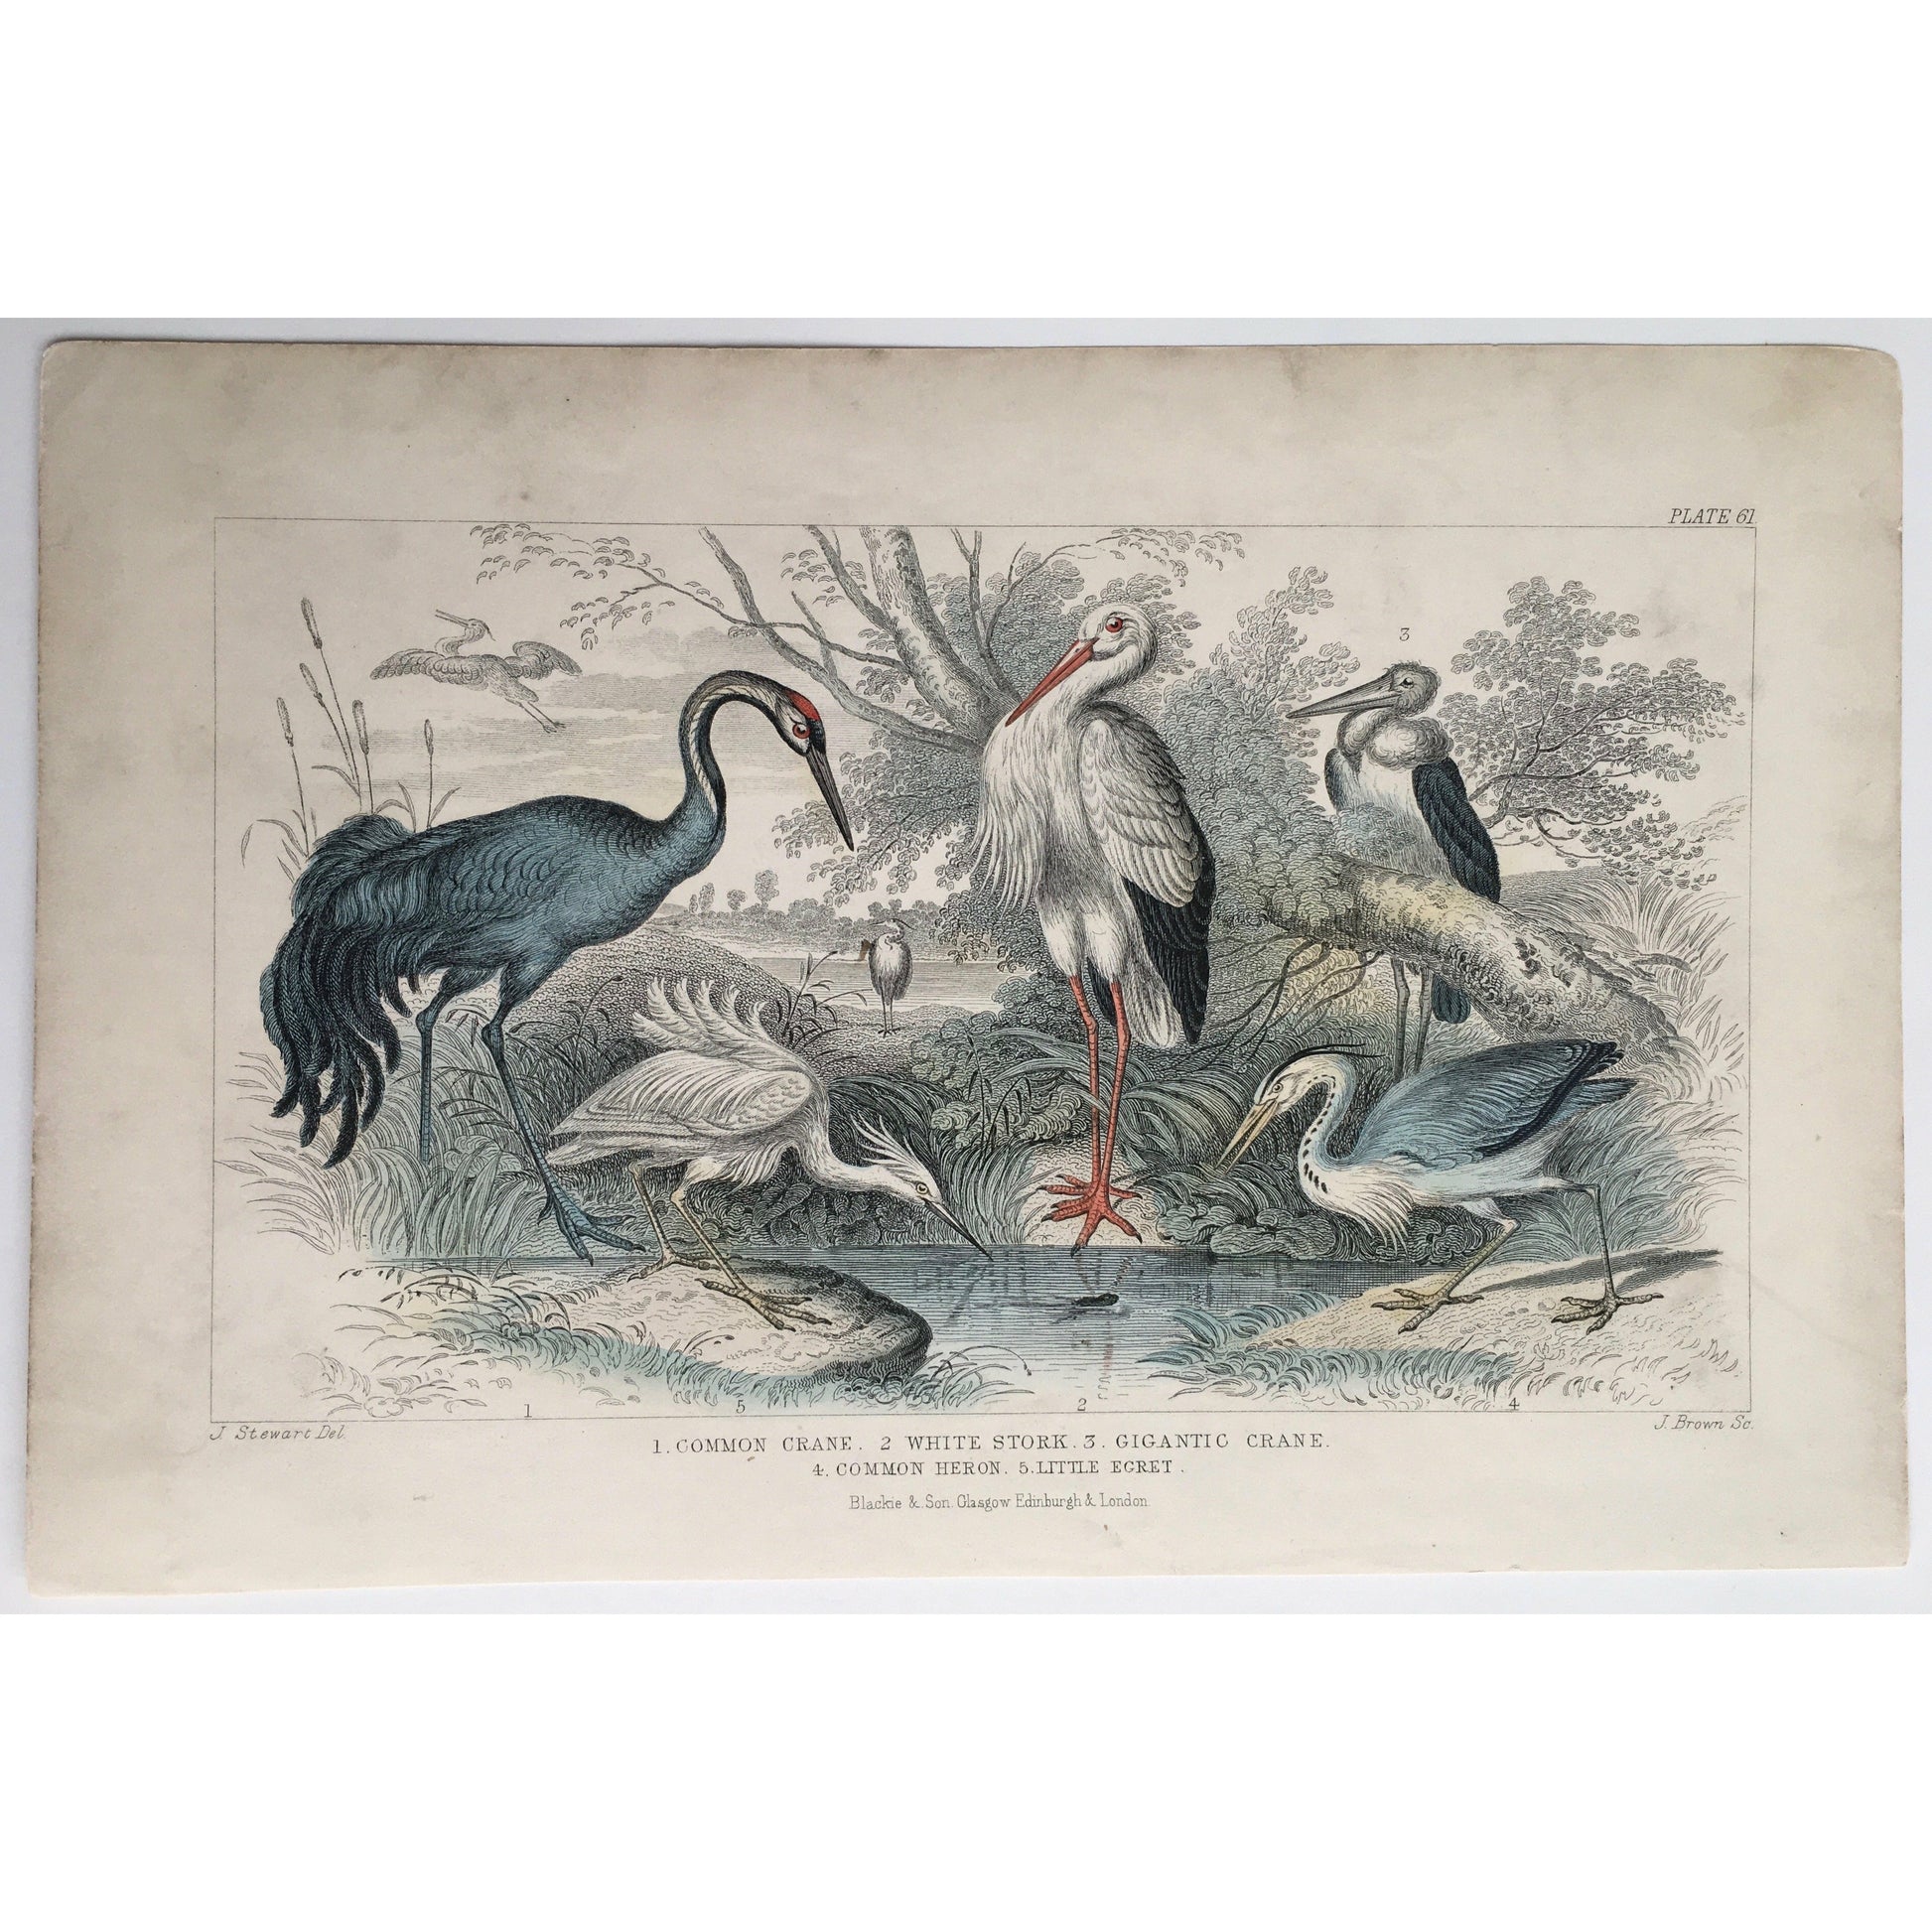 Common Crane, Crane, Cranes, White Stork, Stork, Gigantic Crane, Common Heron, Heron, Little Egret, Egret, Bird, Birds, Ornithology, Oliver Goldsmith, Goldsmith, Natural History, Animals, Wildlife, A History of the Earth and Animated Nature, Nature, Blackie & Son, Blackie and Son, 1852, Coloured Colorful, J. Stewart, J. Brown, Stewart, Brown, Antique Prints, Antique, Prints, Old Prints, Old Books, Rare Prints,